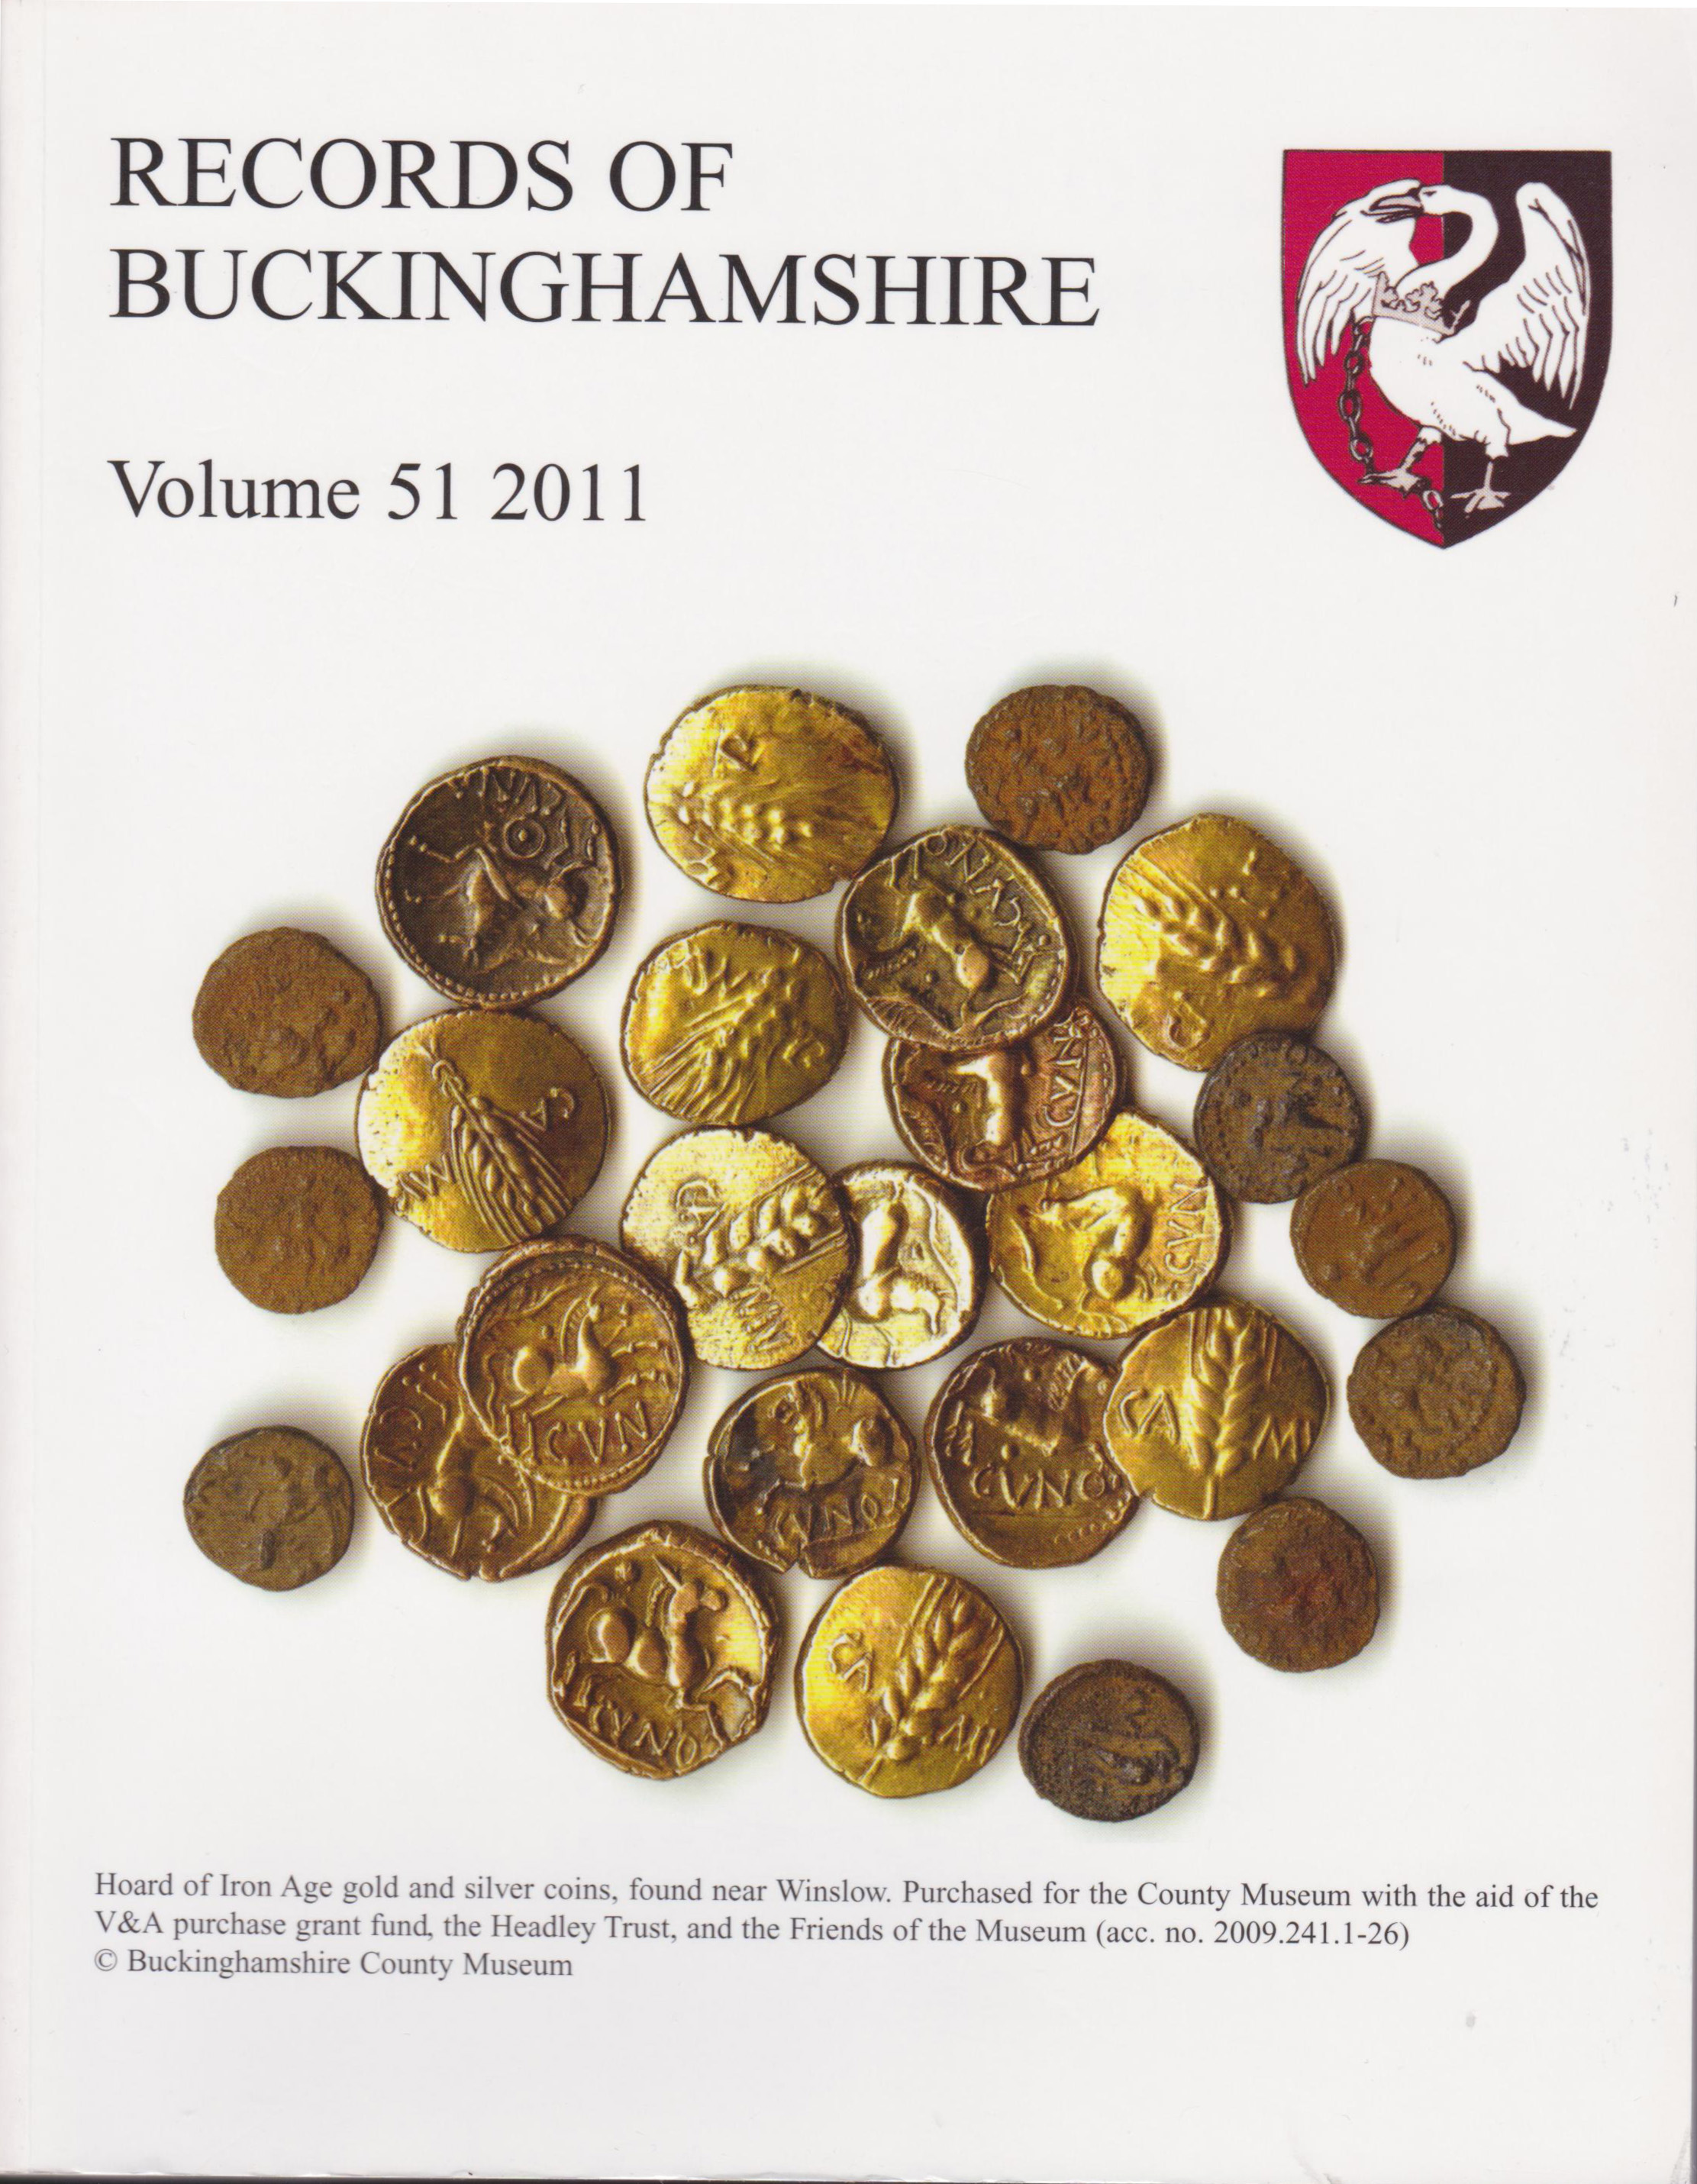 Cover of Records volume 51